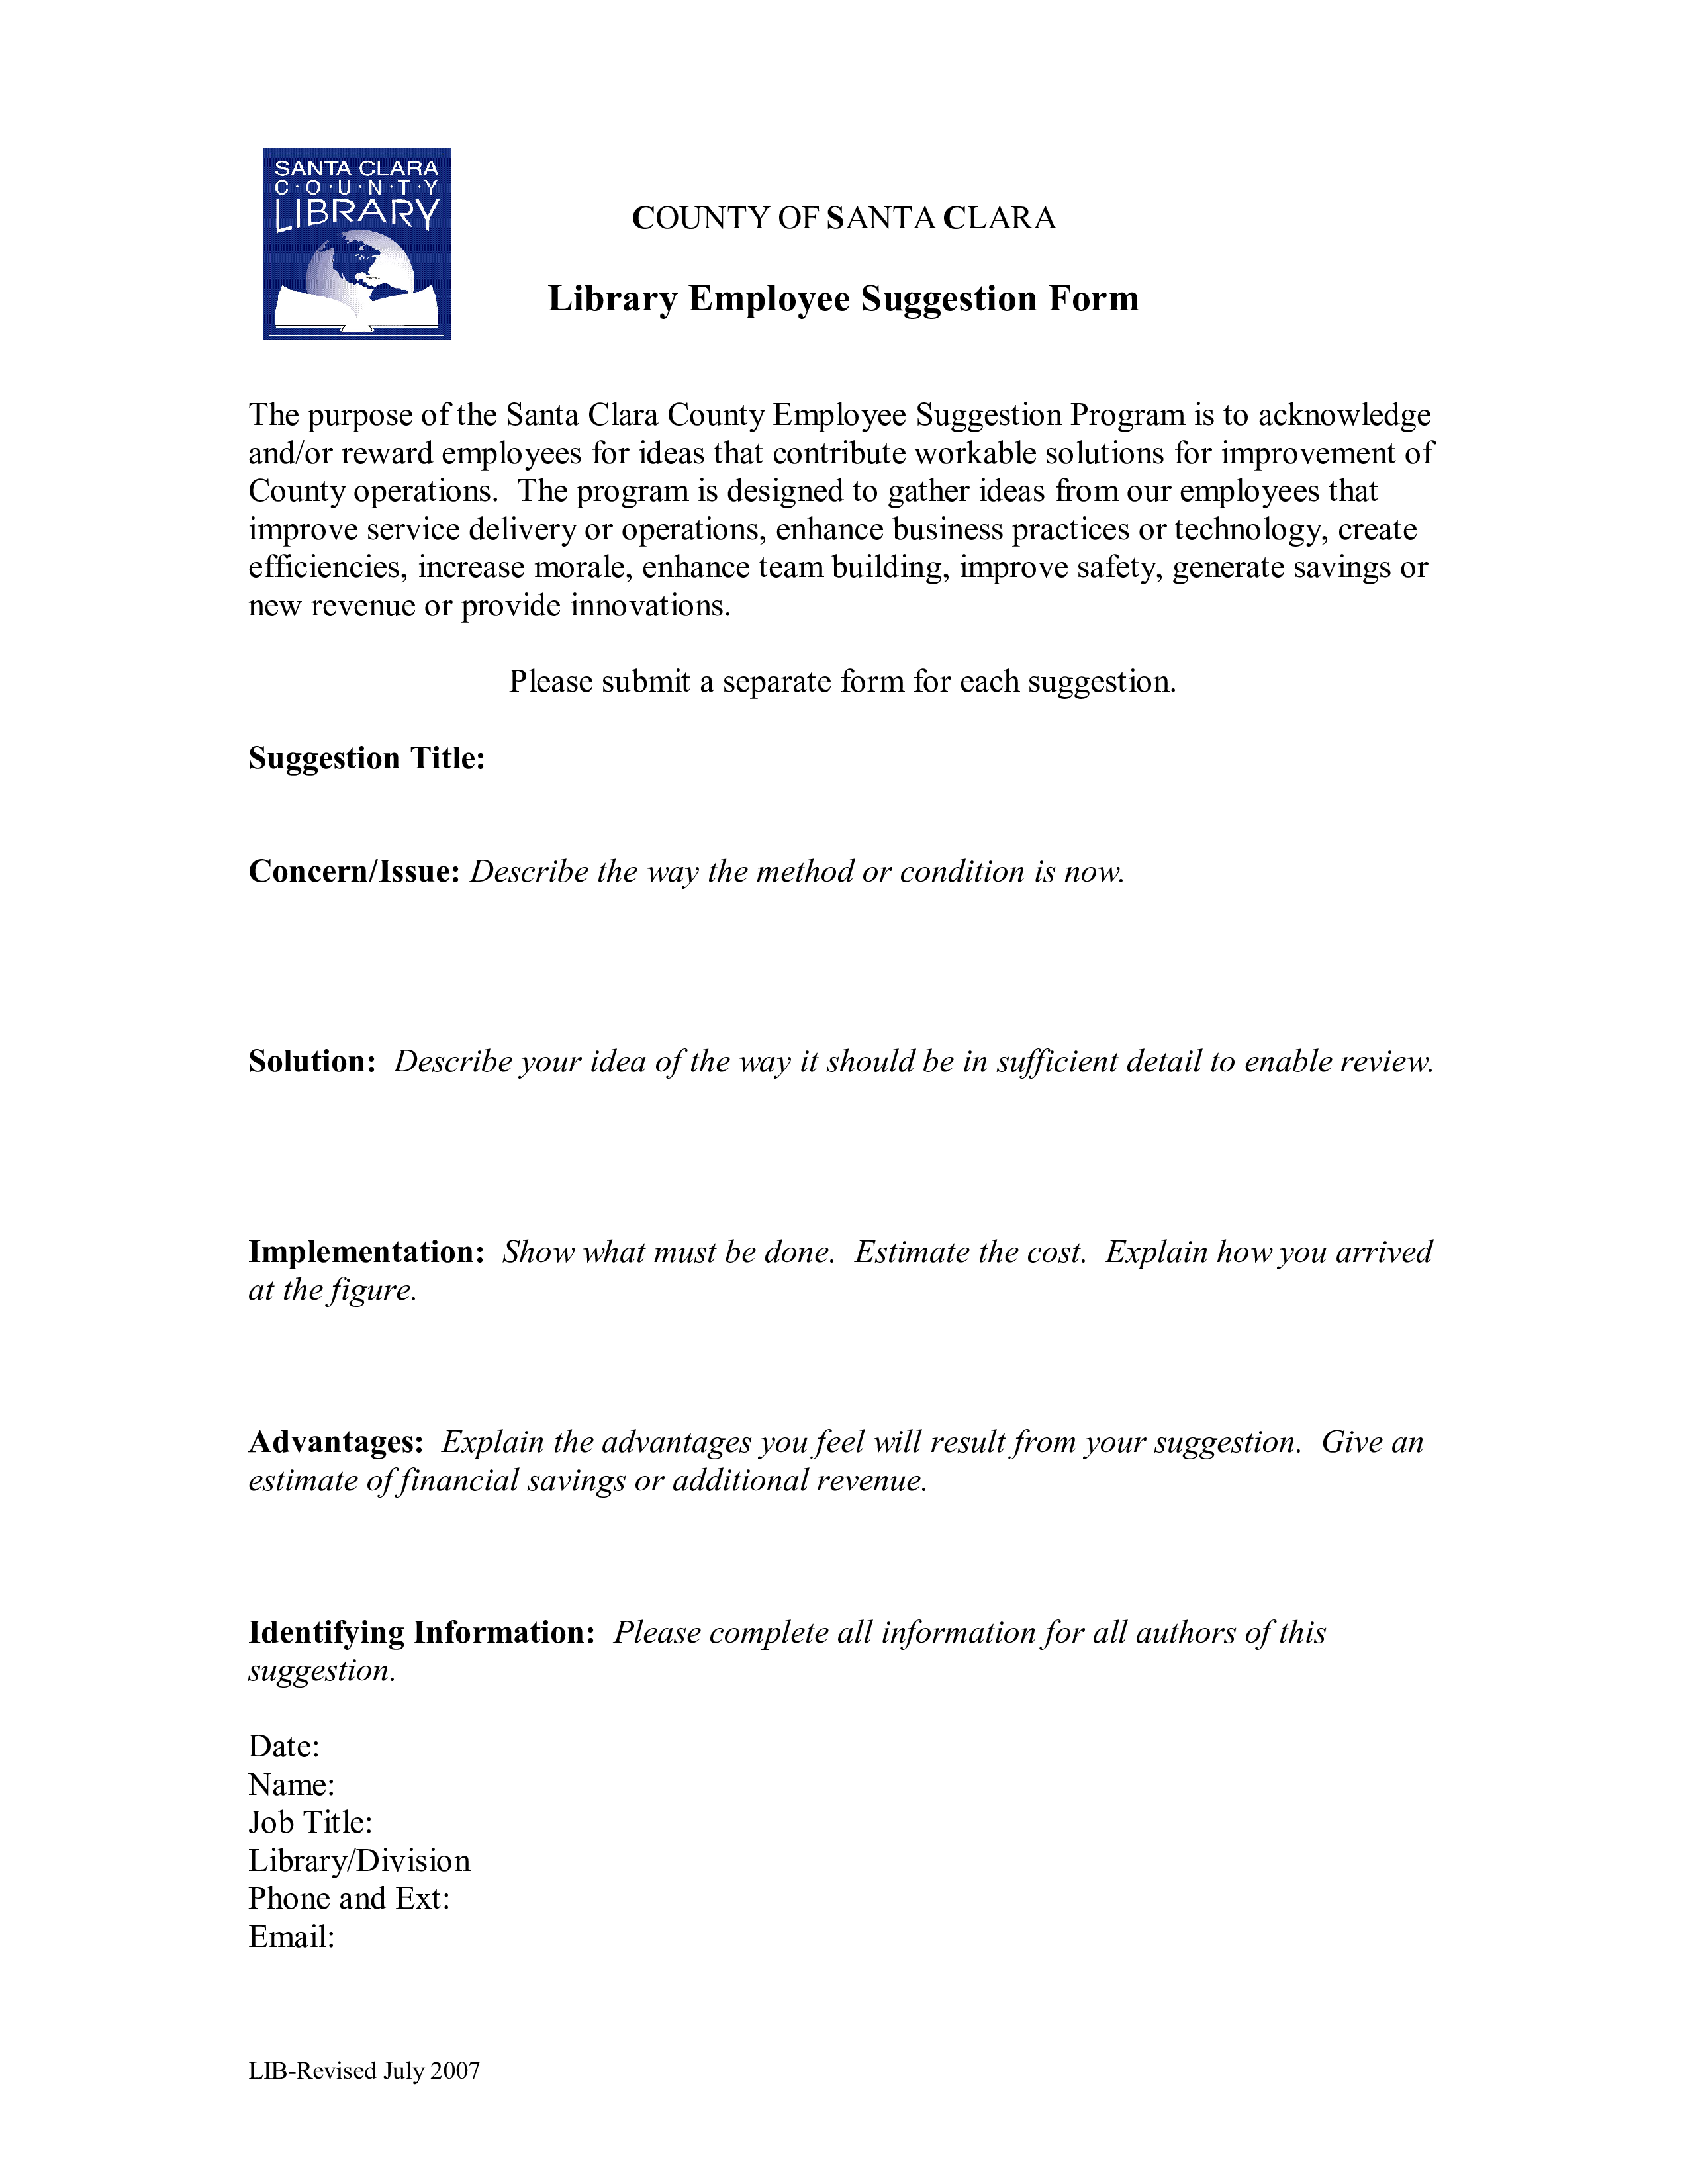 Library Employee Suggestion Form main image